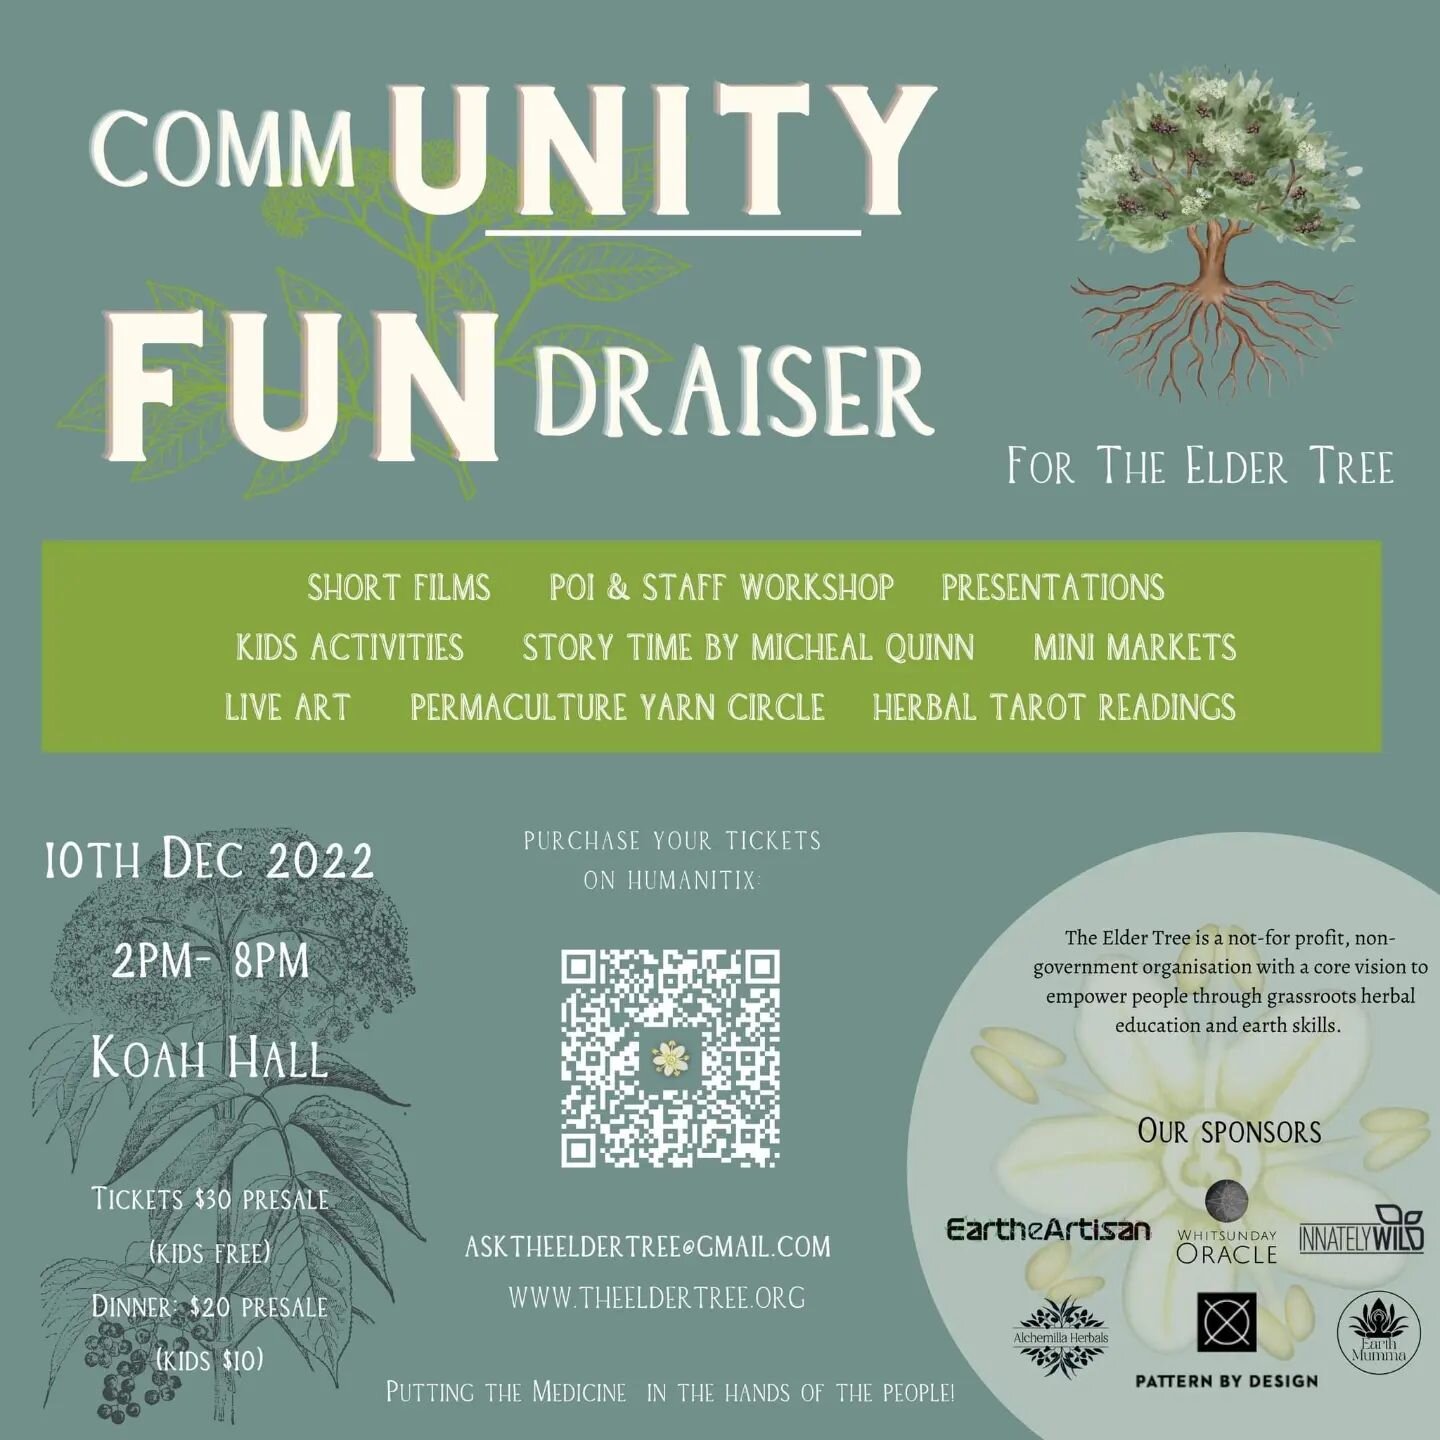 We are very excited to announce our next FUN-draiser event on 10th Dec at the Koah Hall !

Come and join us for an informative and fun day out.
 There will be:

- Short Films
- Presentations
- Permaculture Yarn Circle
- Kids Activities
- Story Time b